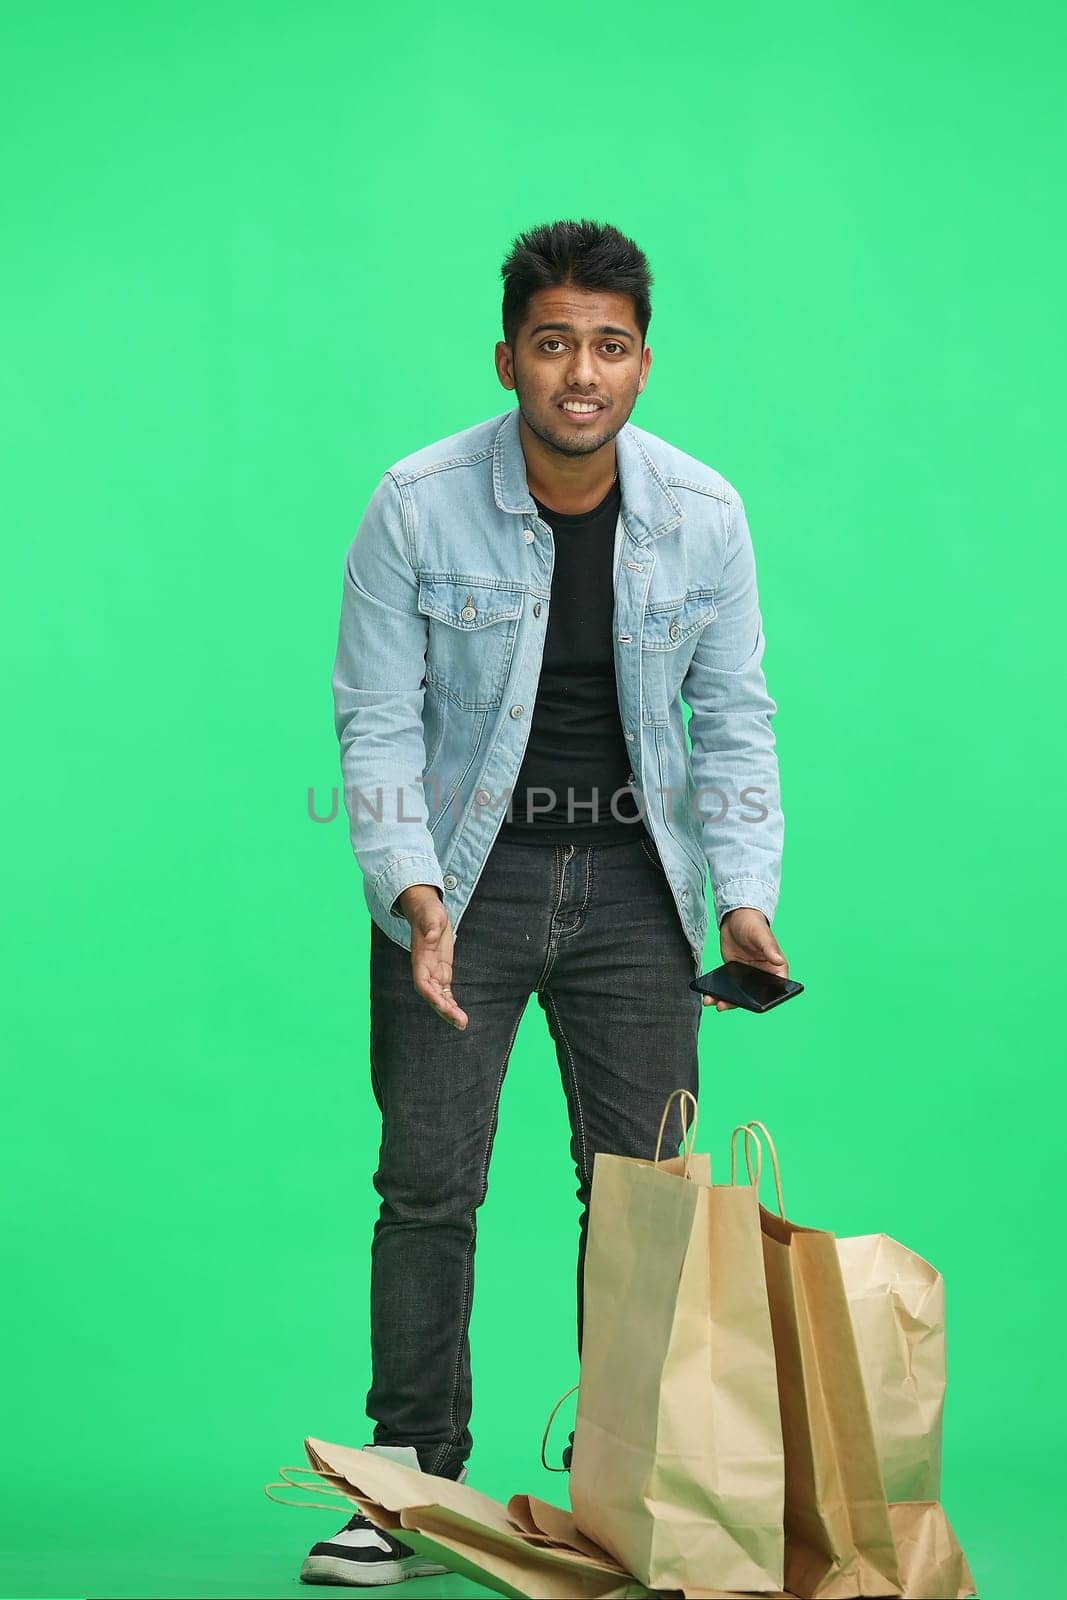 Man on a green background with shoppers.